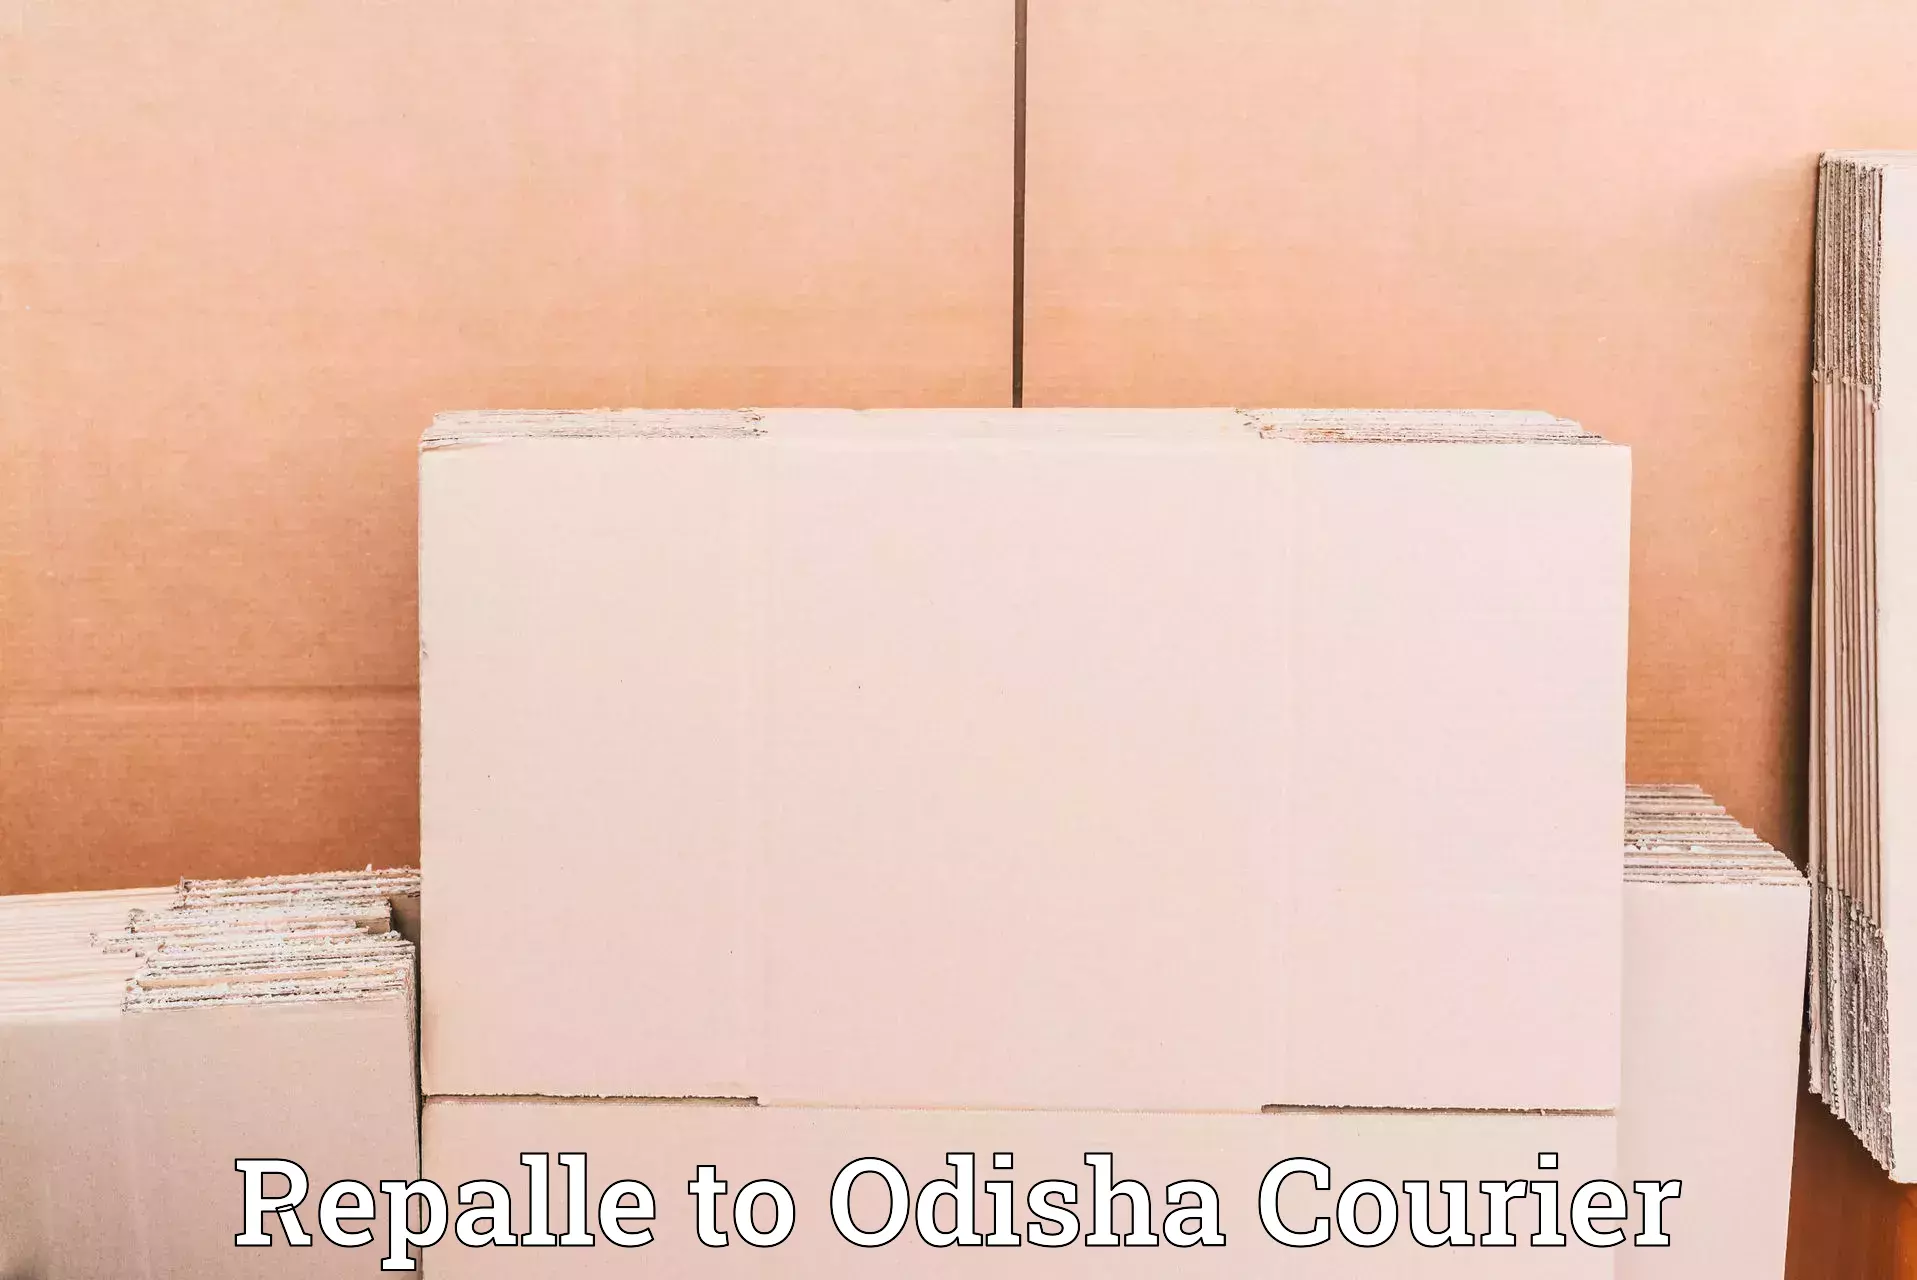 Subscription-based courier Repalle to Kodala